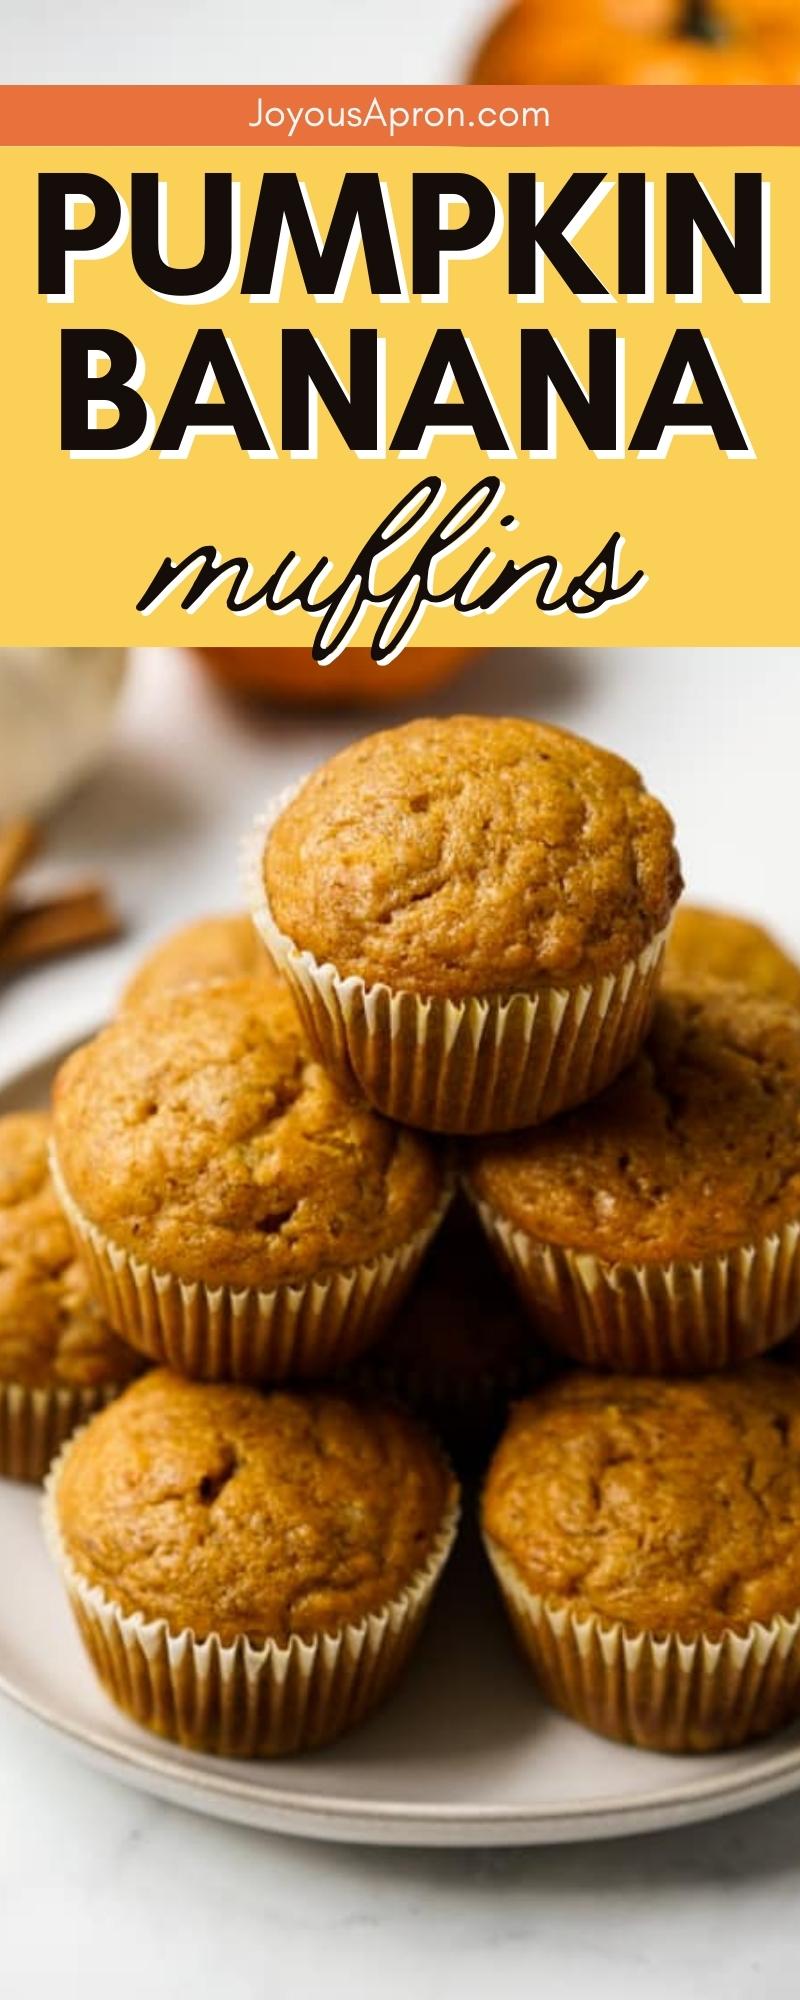 Pumpkin Banana Muffins - Moist and soft muffins with pumpkin and banana flavors make the perfect breakfast and dessert for the Fall! Great for snack, afternoon tea, breakfast and brunch! via @joyousapron